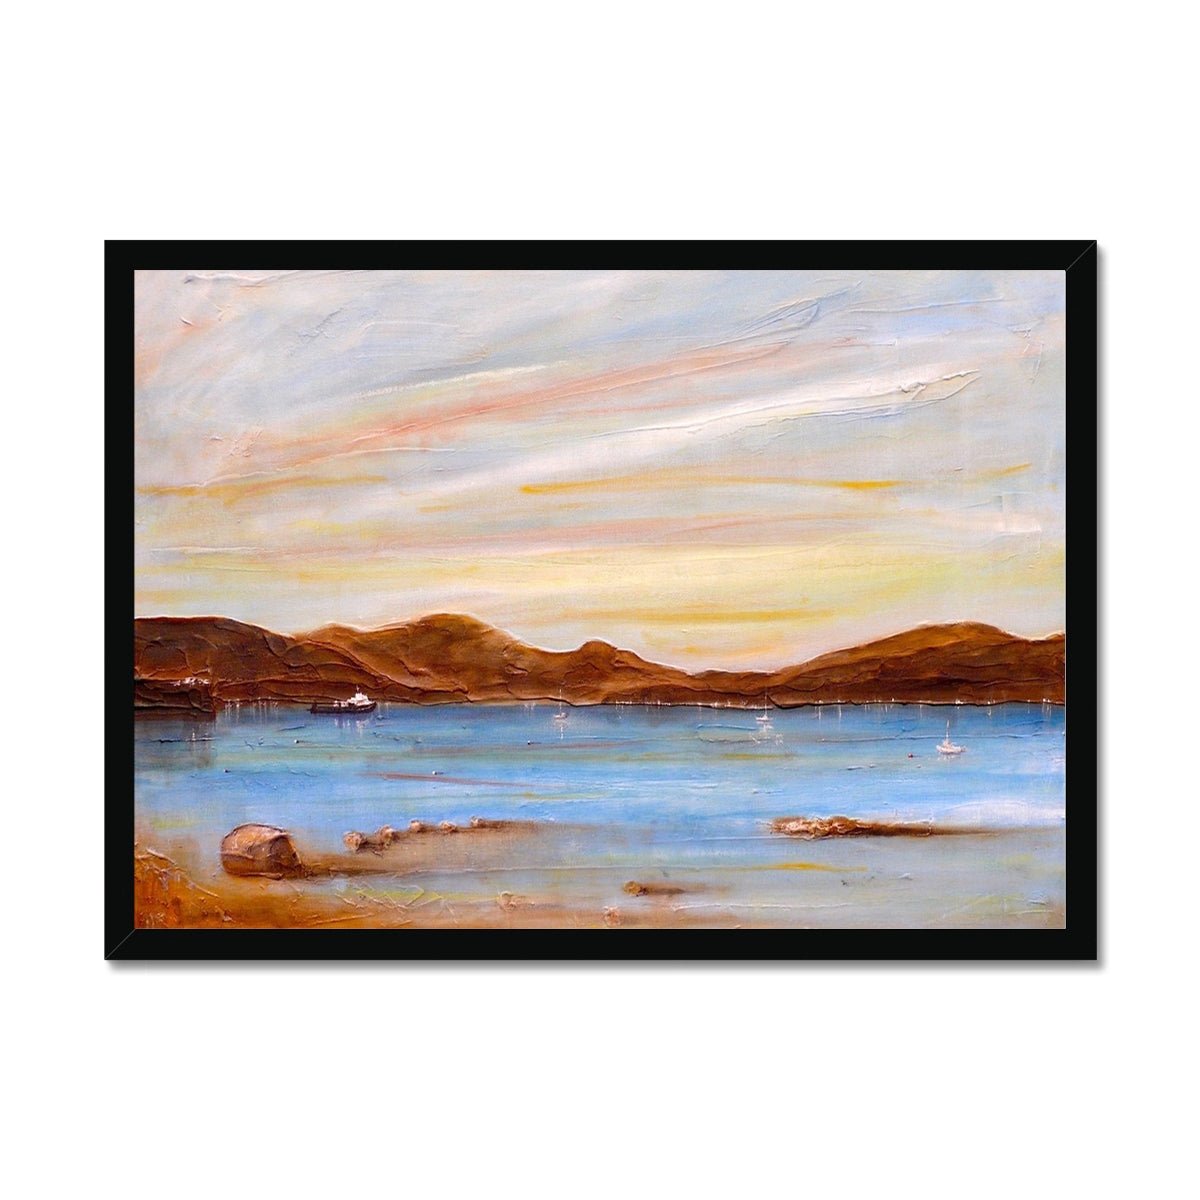 The Last Ferry To Dunoon Painting | Framed Prints From Scotland-Framed Prints-River Clyde Art Gallery-A2 Landscape-Black Frame-Paintings, Prints, Homeware, Art Gifts From Scotland By Scottish Artist Kevin Hunter